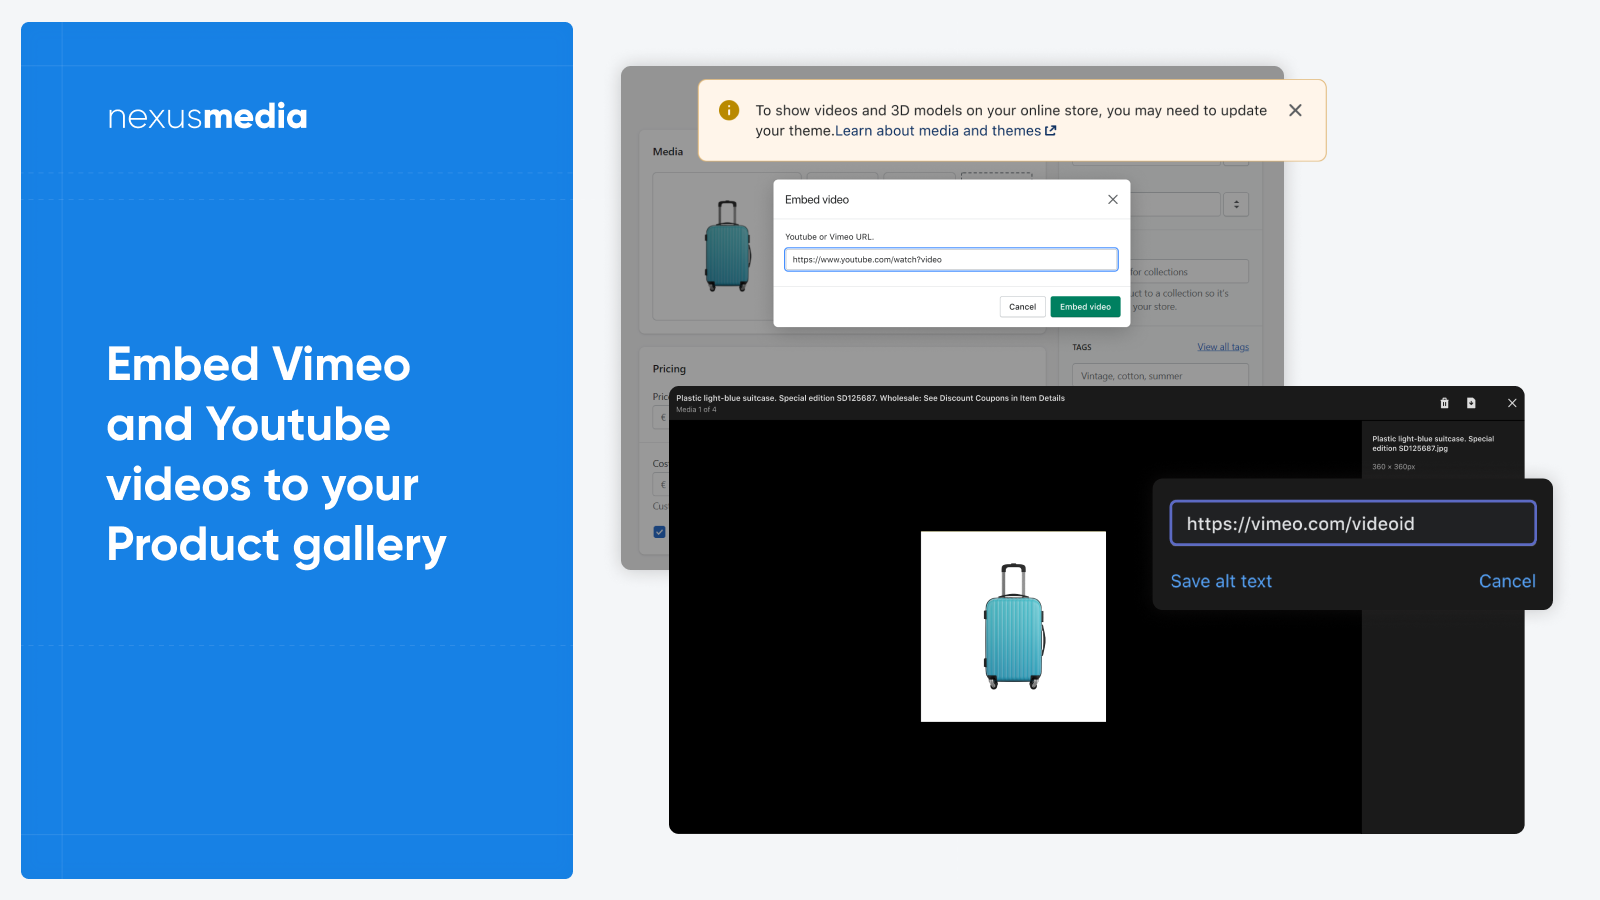 Embed Vimeo and Youtube videos to your Product Gallery